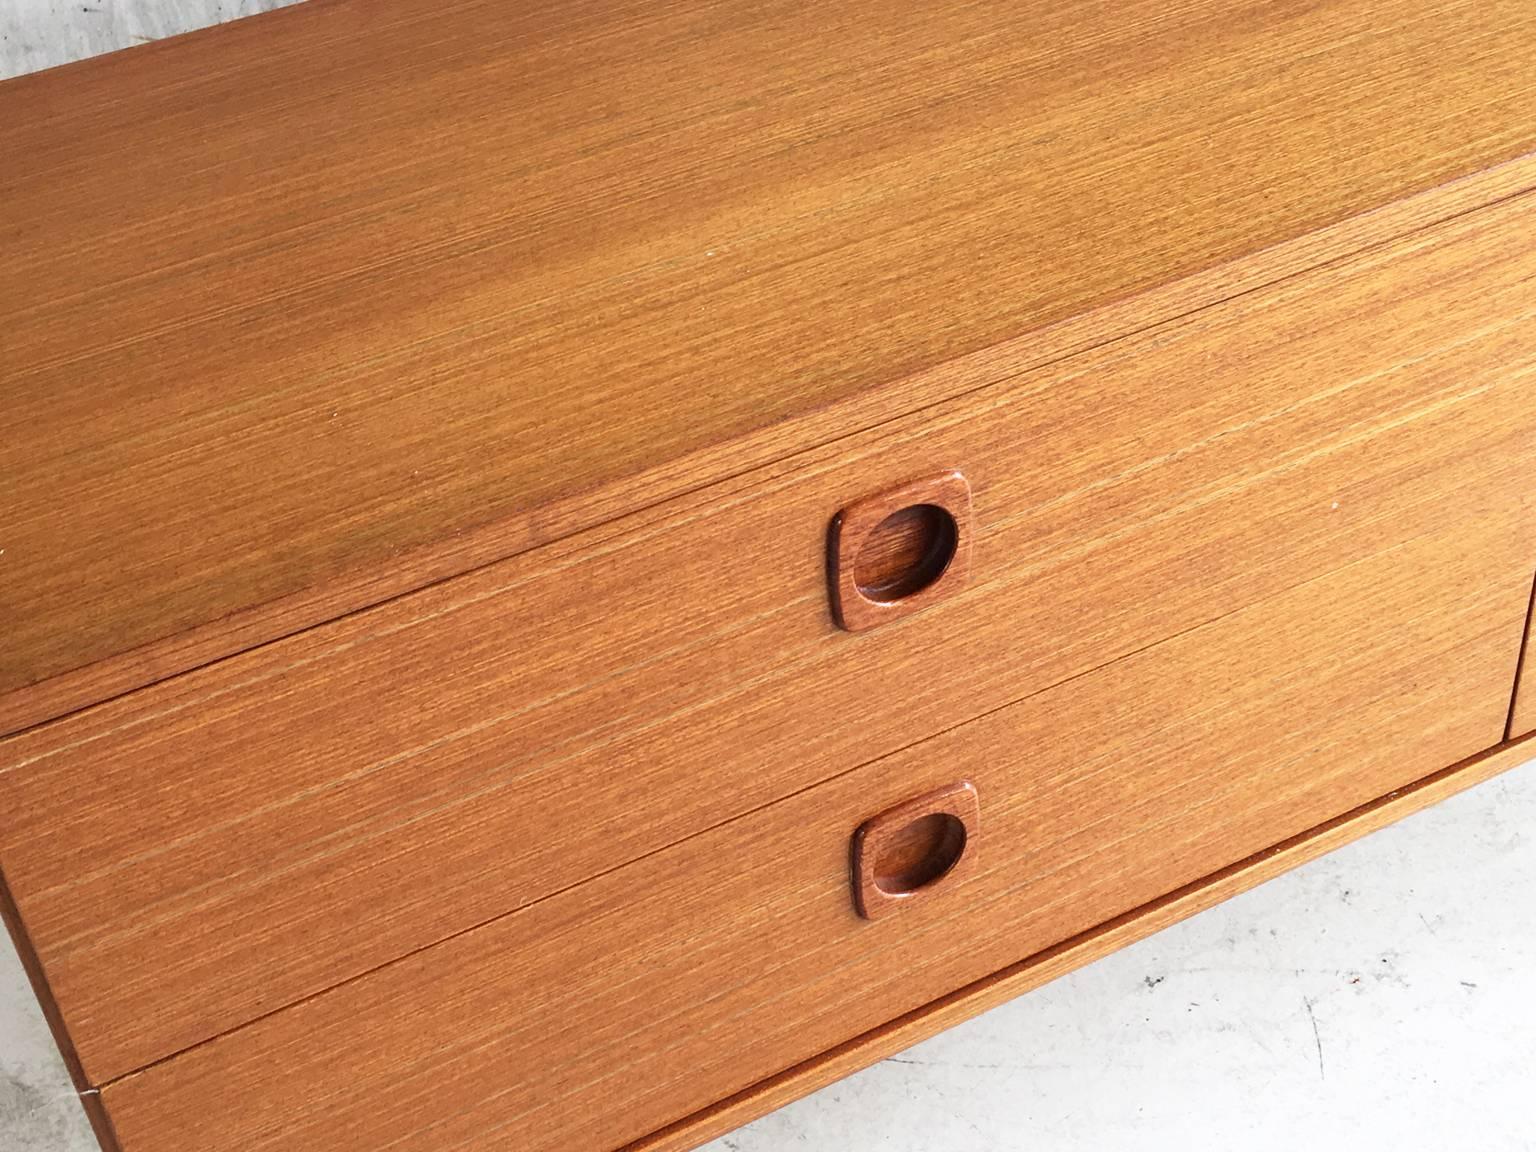 Great Britain (UK) 1970s Mid-Century Teak Schreiber Chest of Drawers with Recessed Draw Pulls For Sale